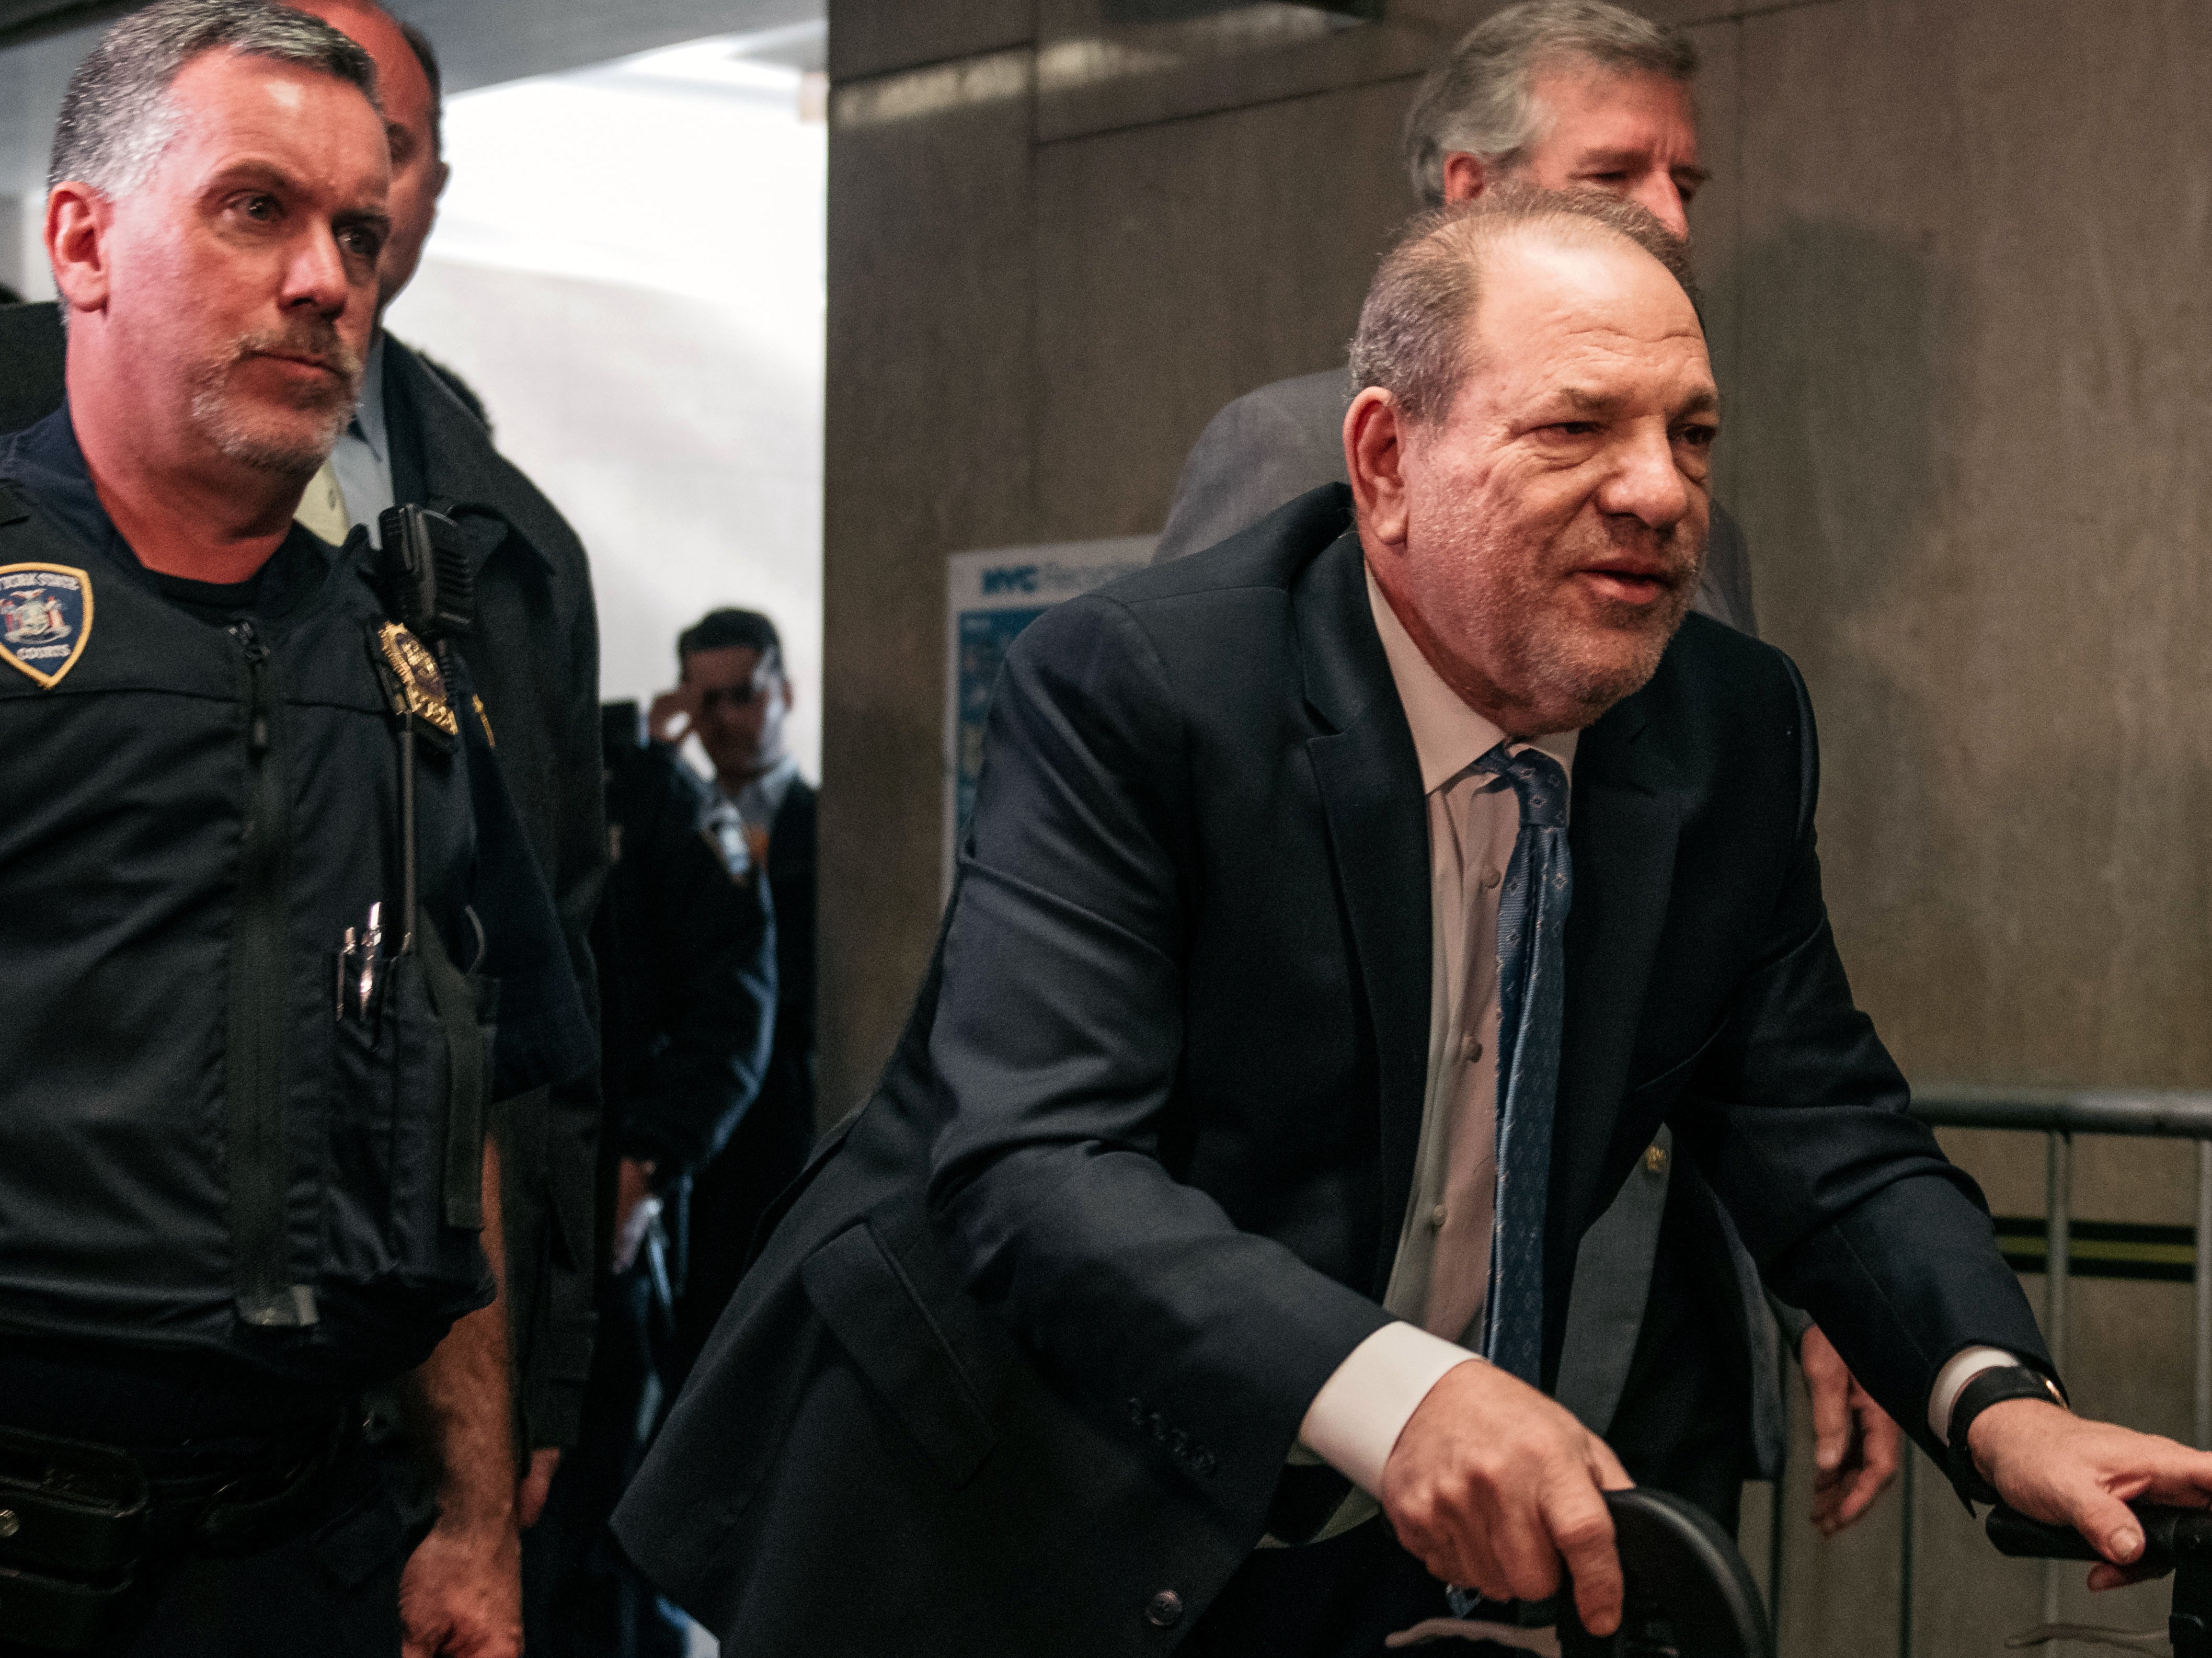 Harvey Weinstein enters a courtroom on 24 February 2020 in New York City